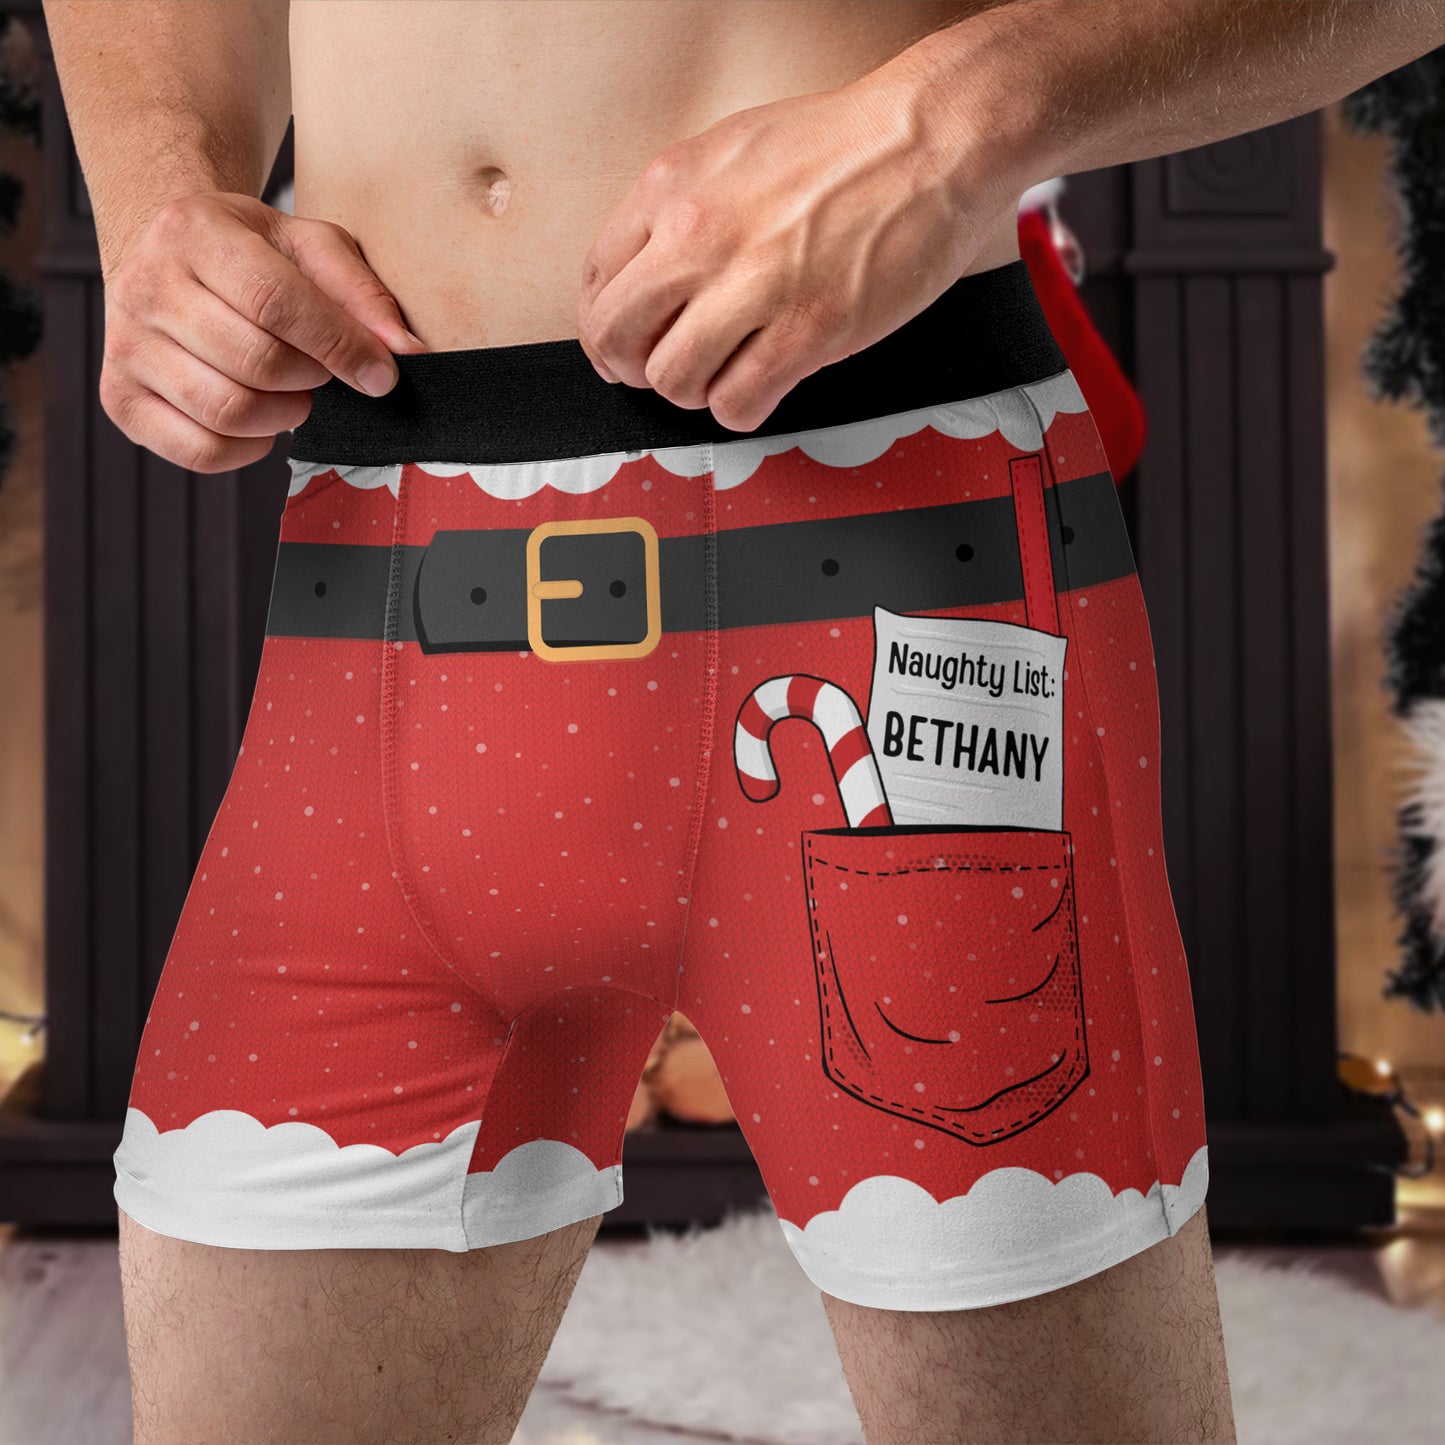 Ride My Sleigh Funny Christmas - Personalized Men's Boxer Briefs